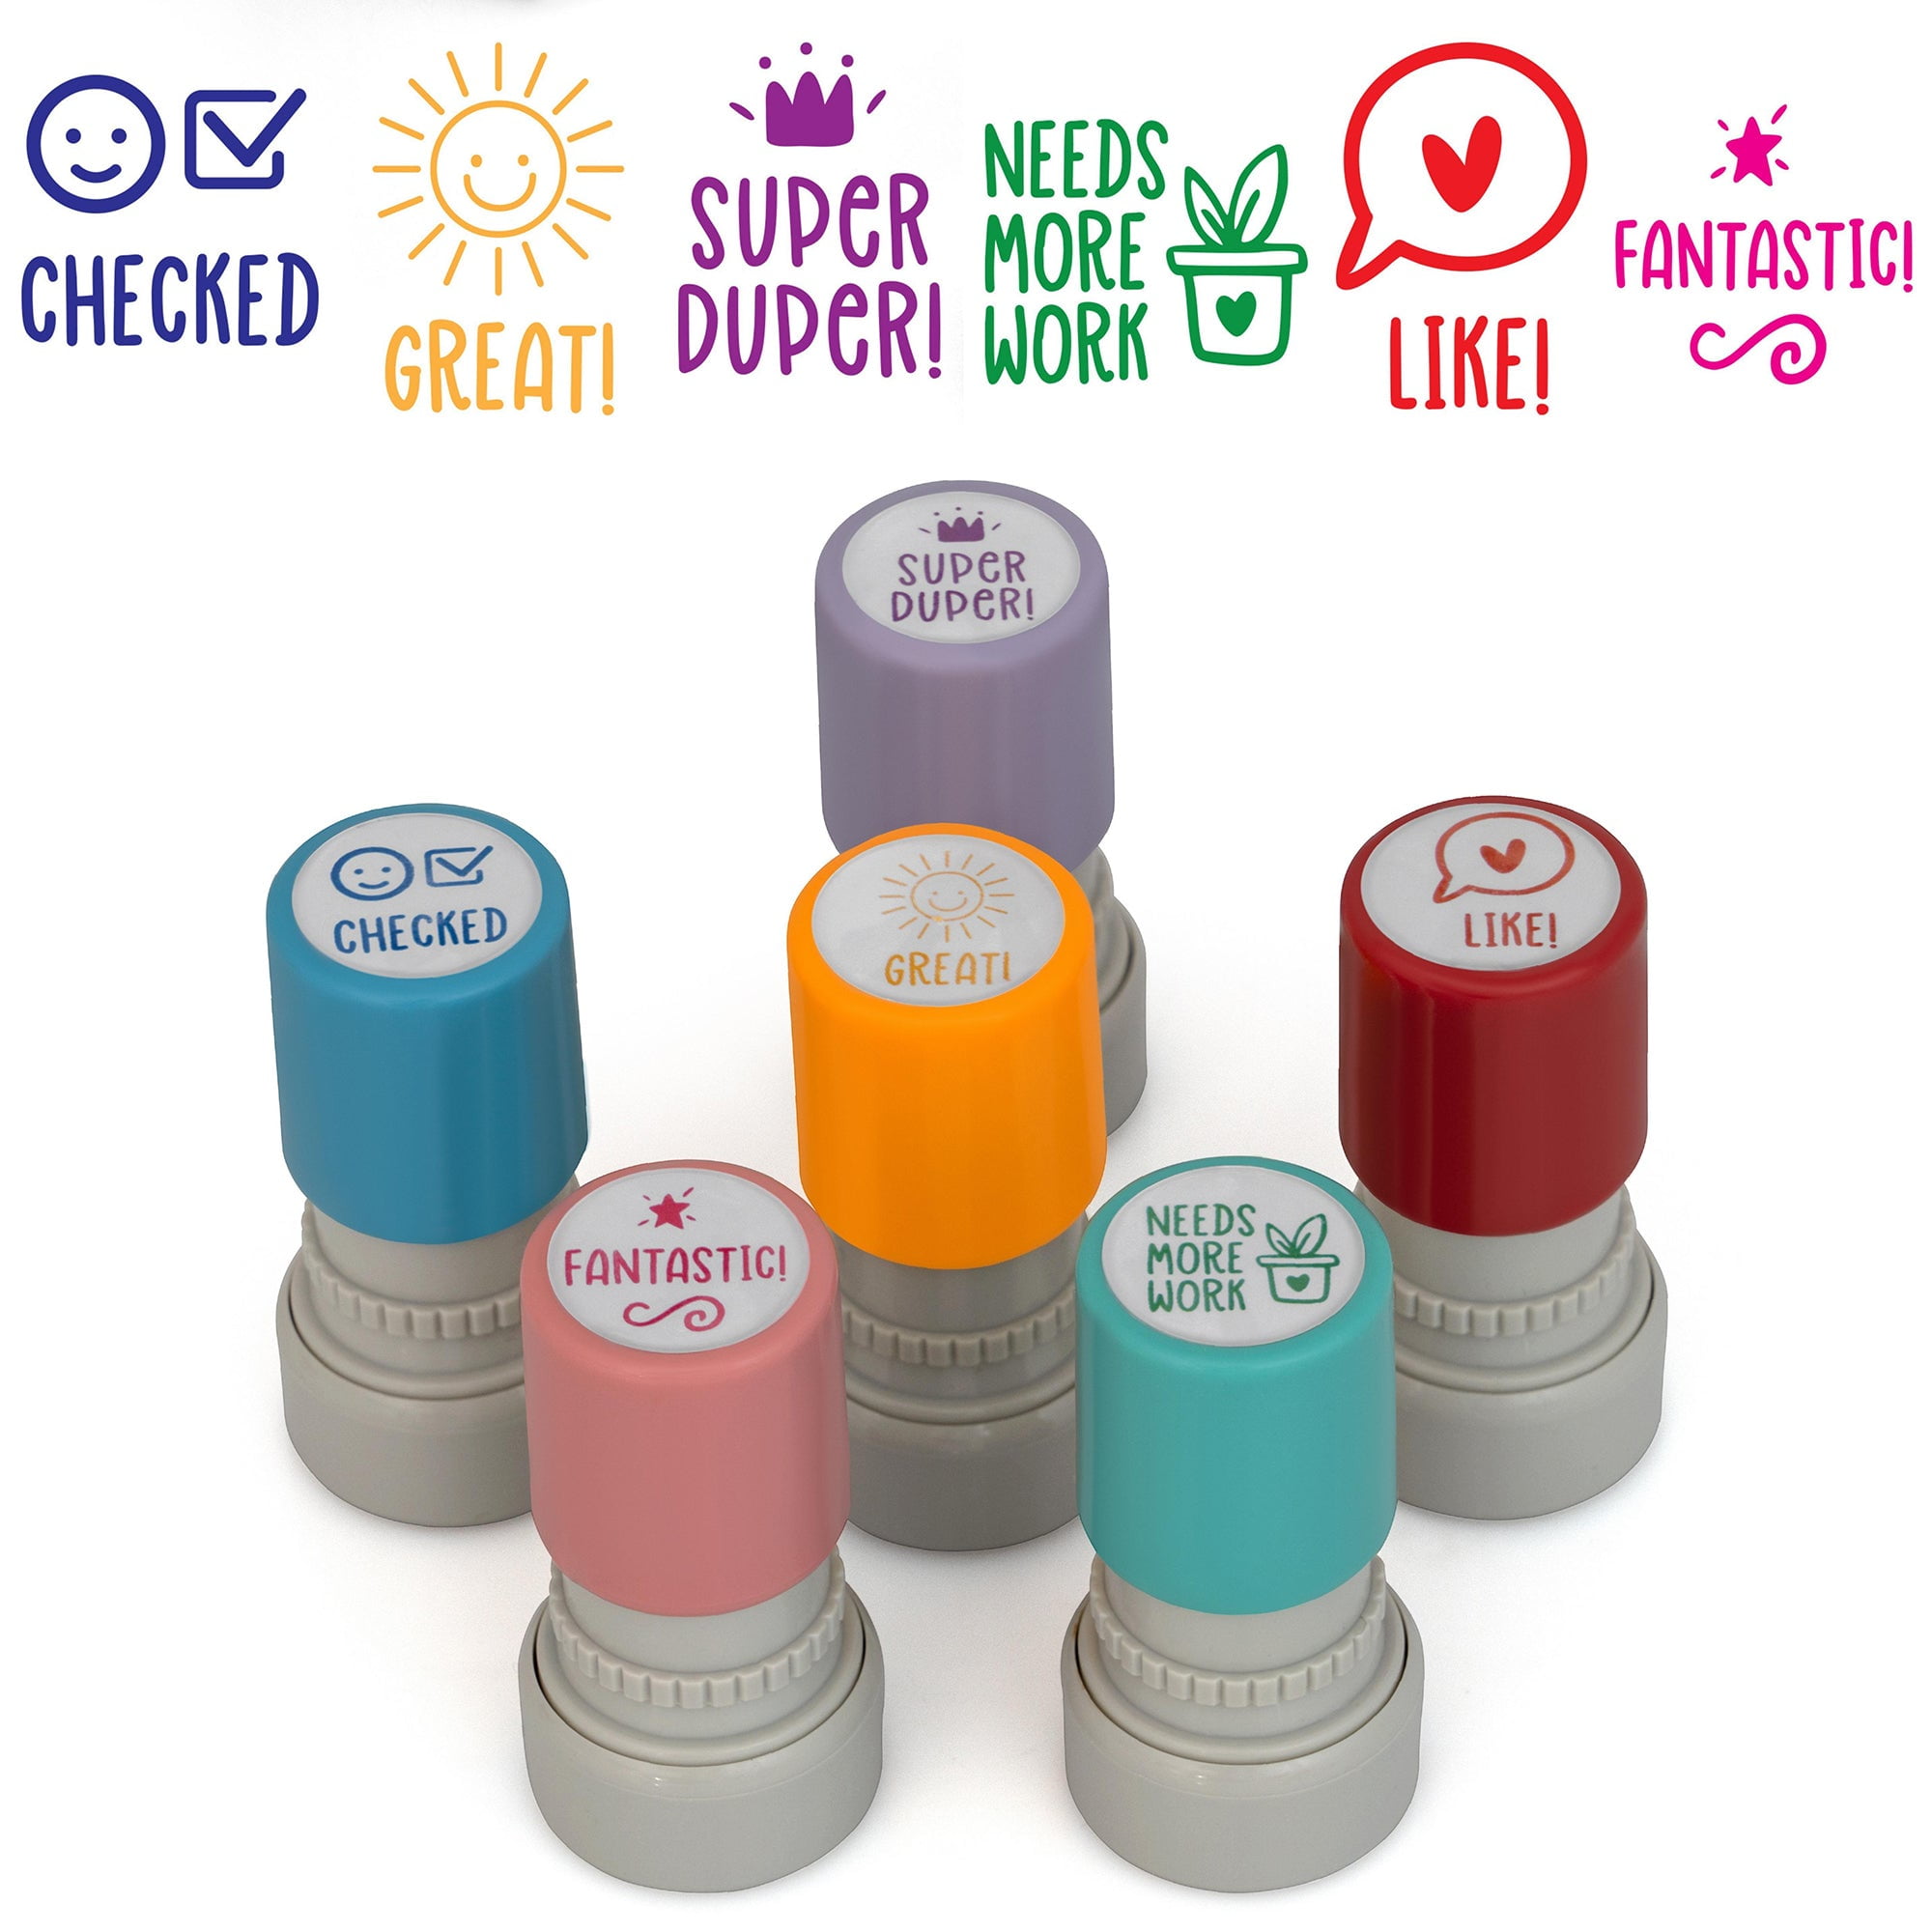 Power Words Rubber Stamps - Set of 6 – Make & Mend